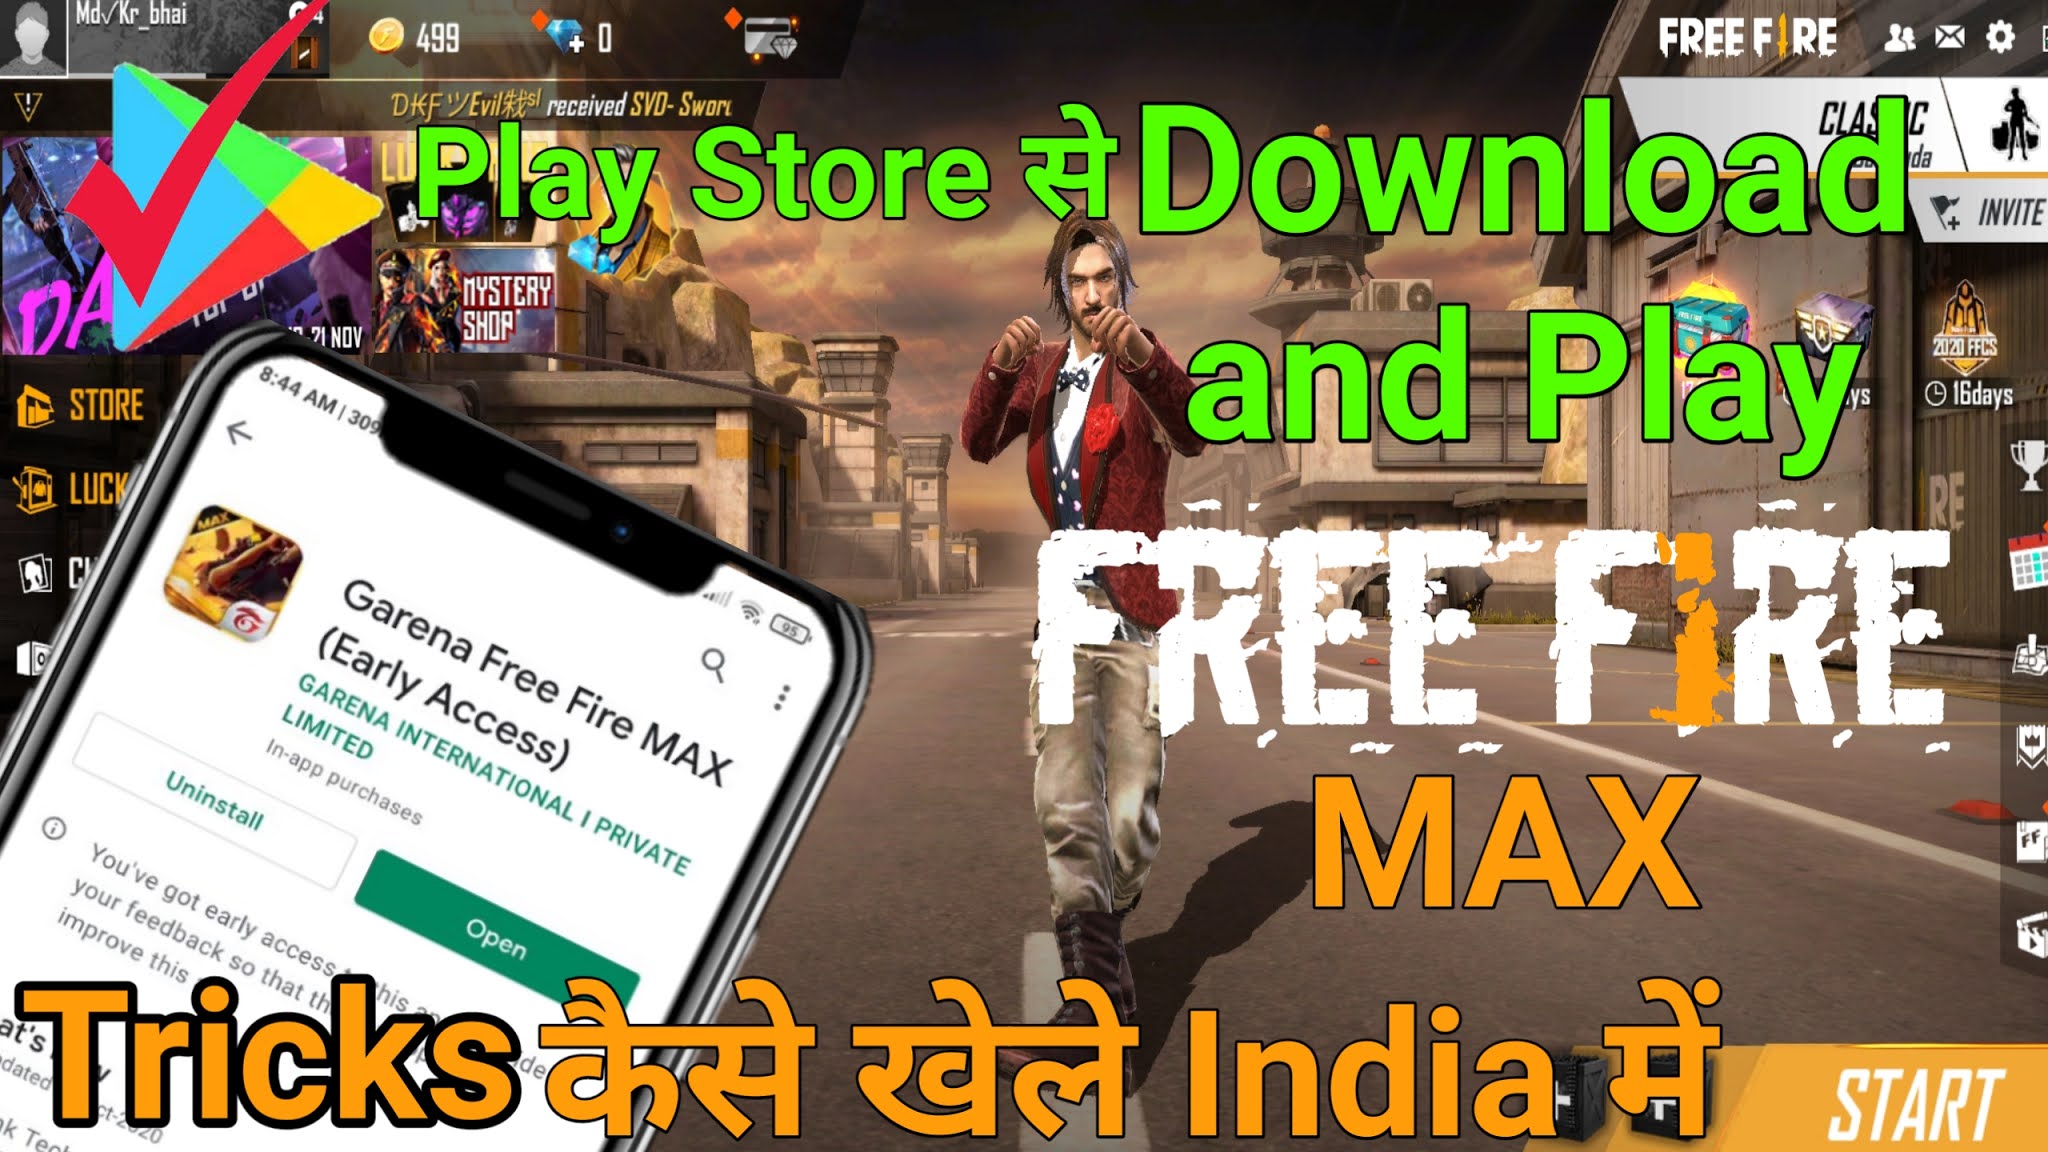 HOW TO DOWNLOAD FREE FIRE MAX  FreeFire Max kaise download Kare